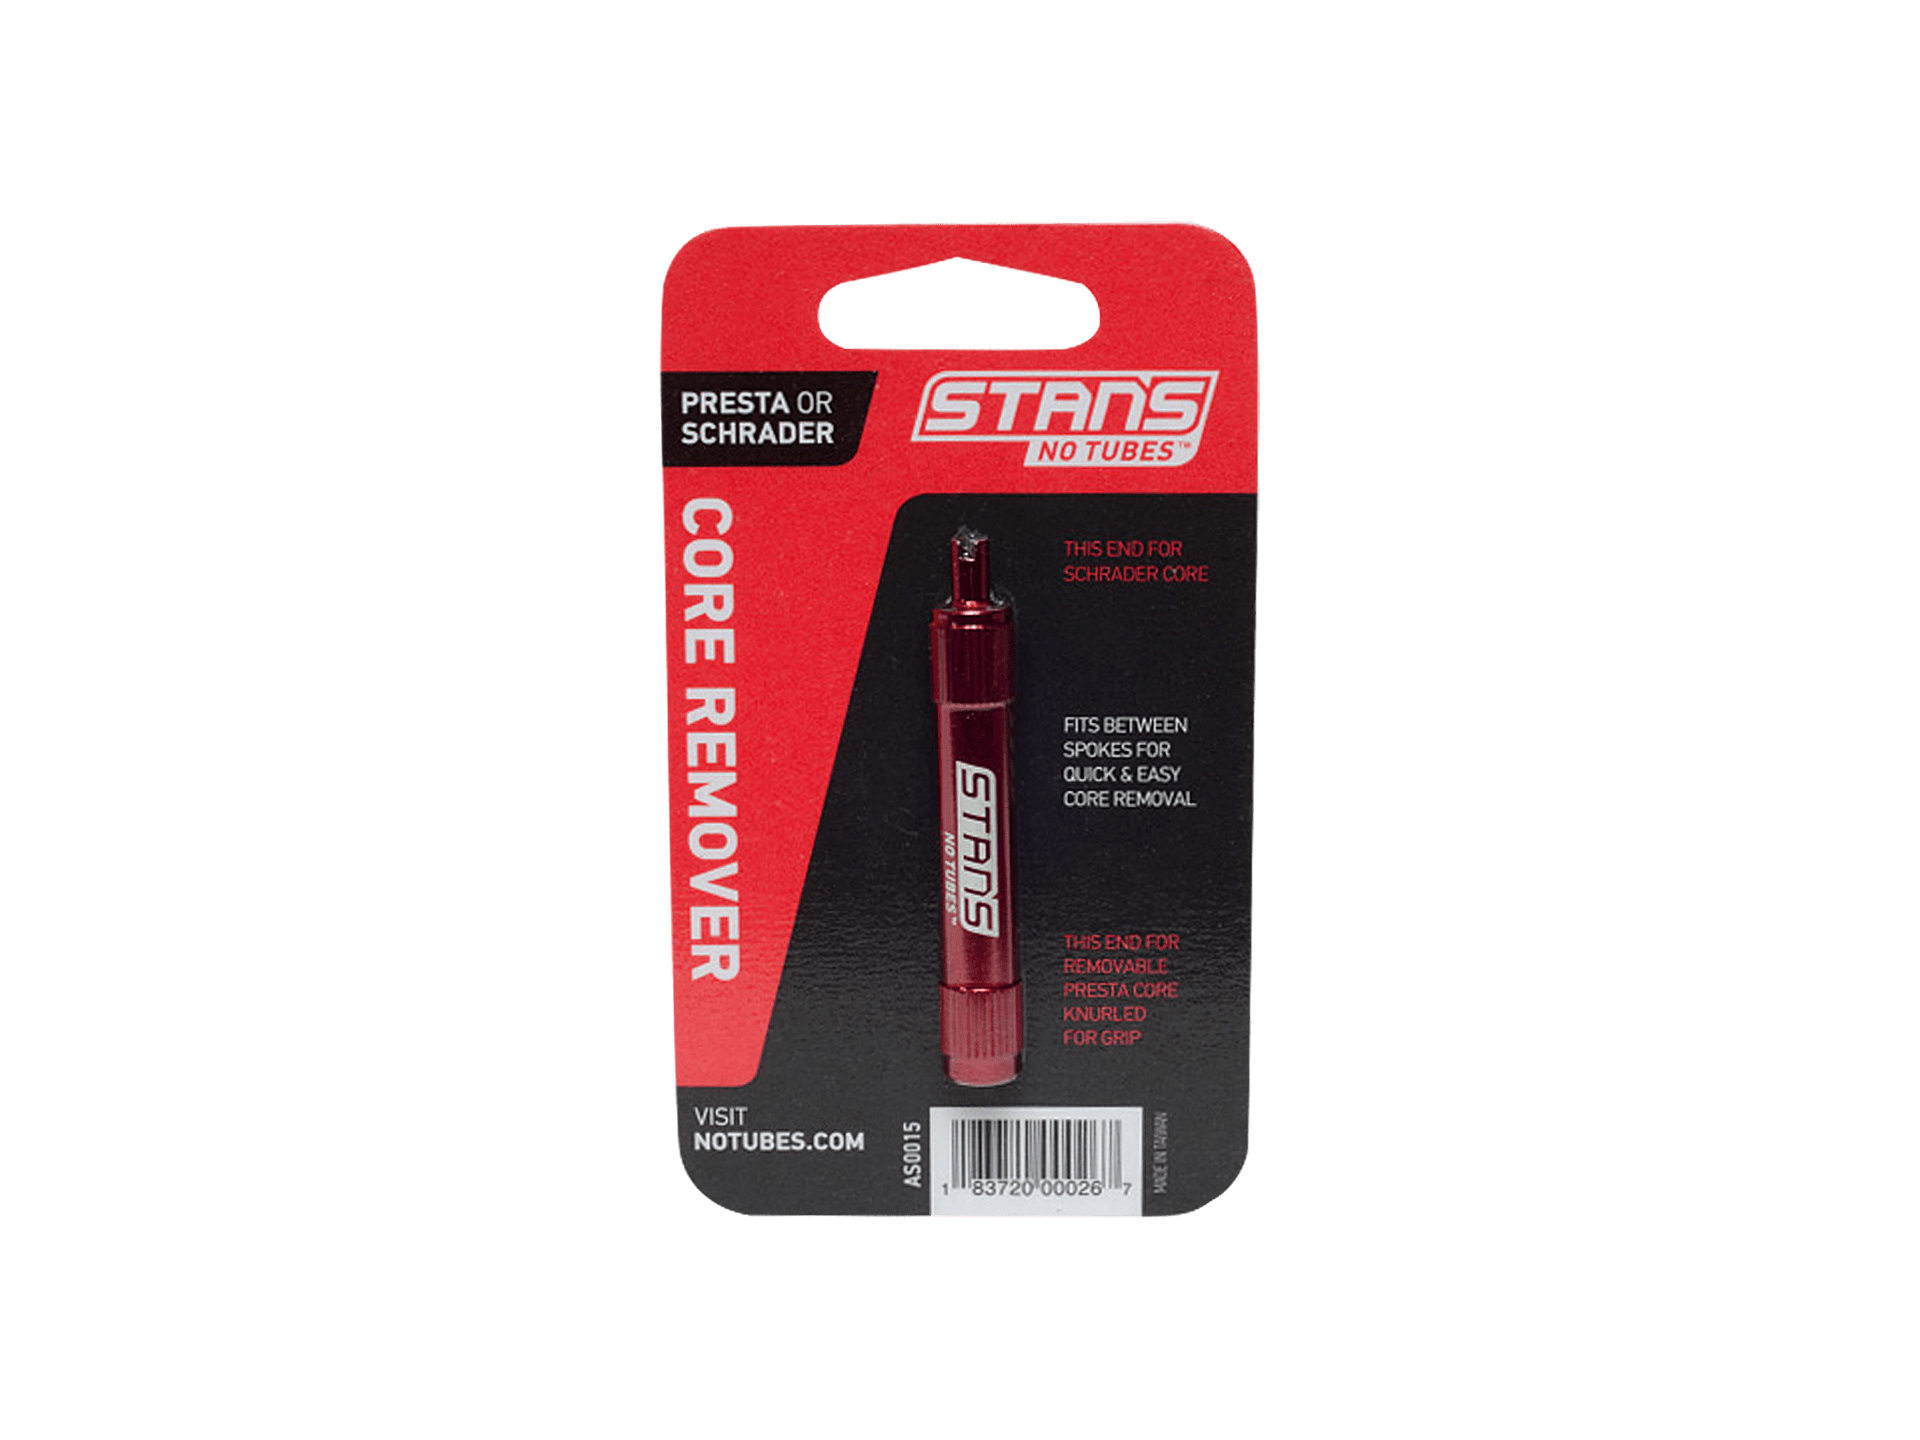 Stan's NoTubes Valve Core Removal Tool